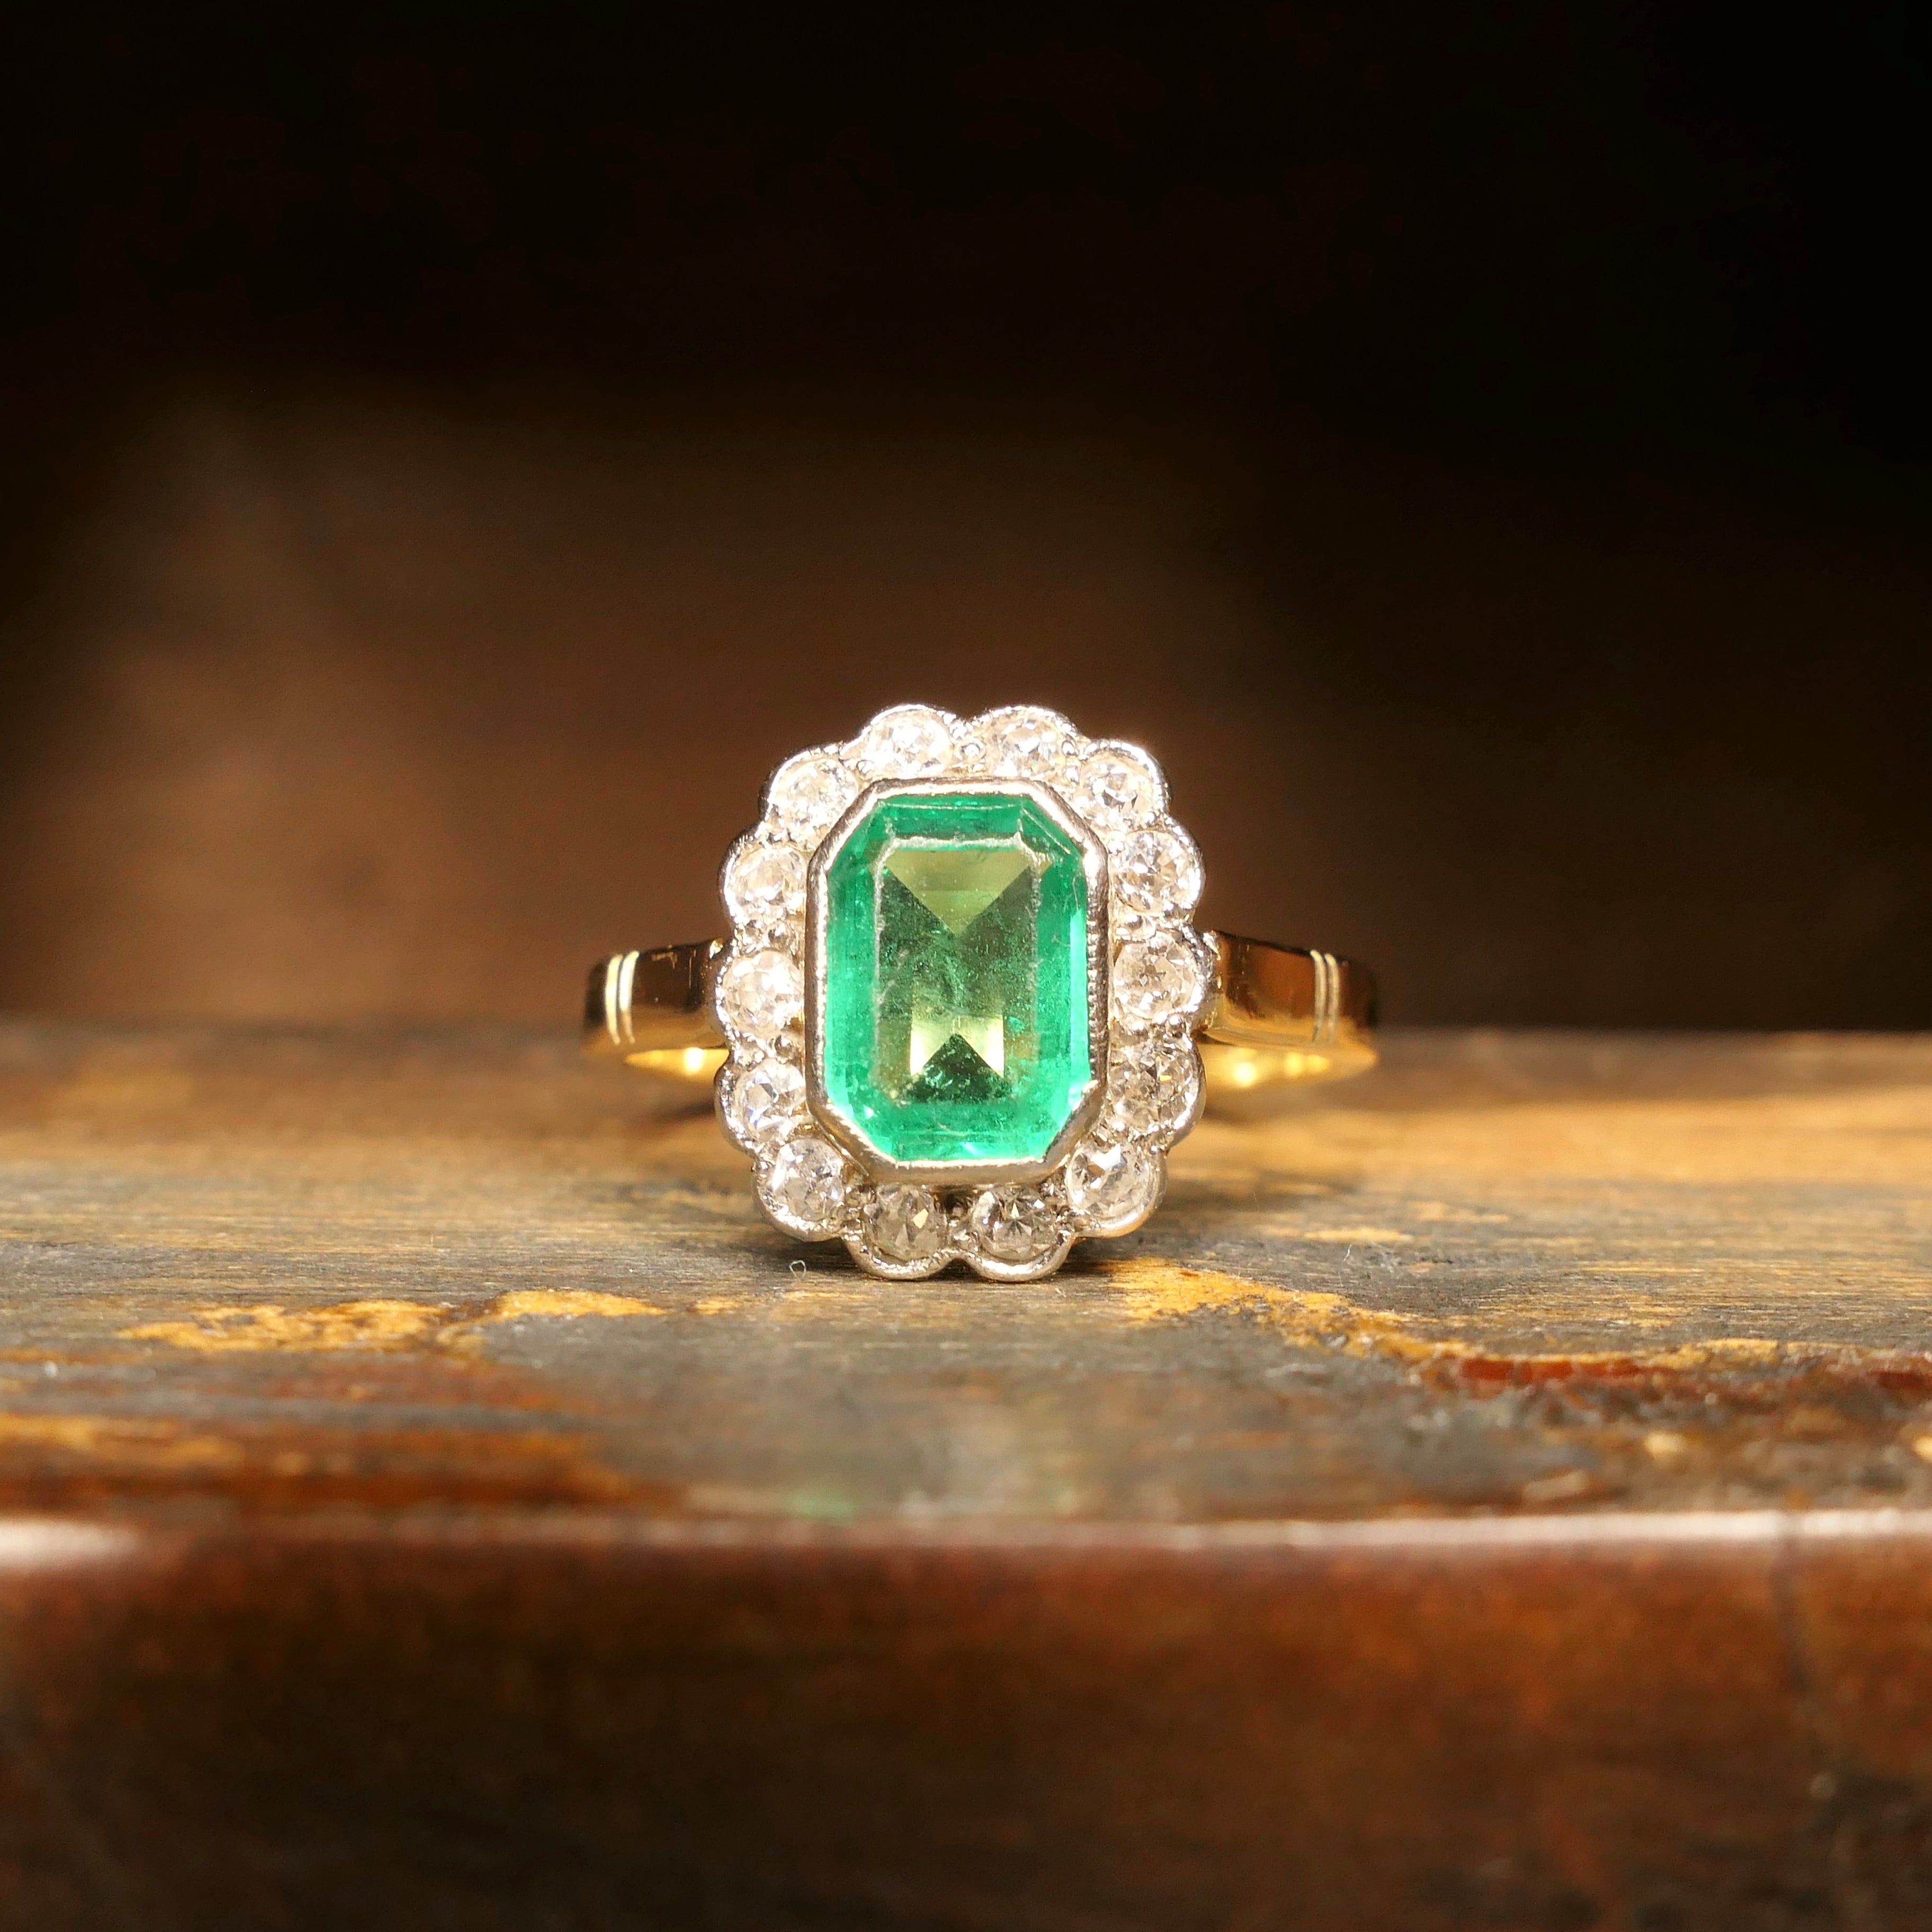 Original Art Deco, 18ct gold, emerald and old cut diamond cluster ring